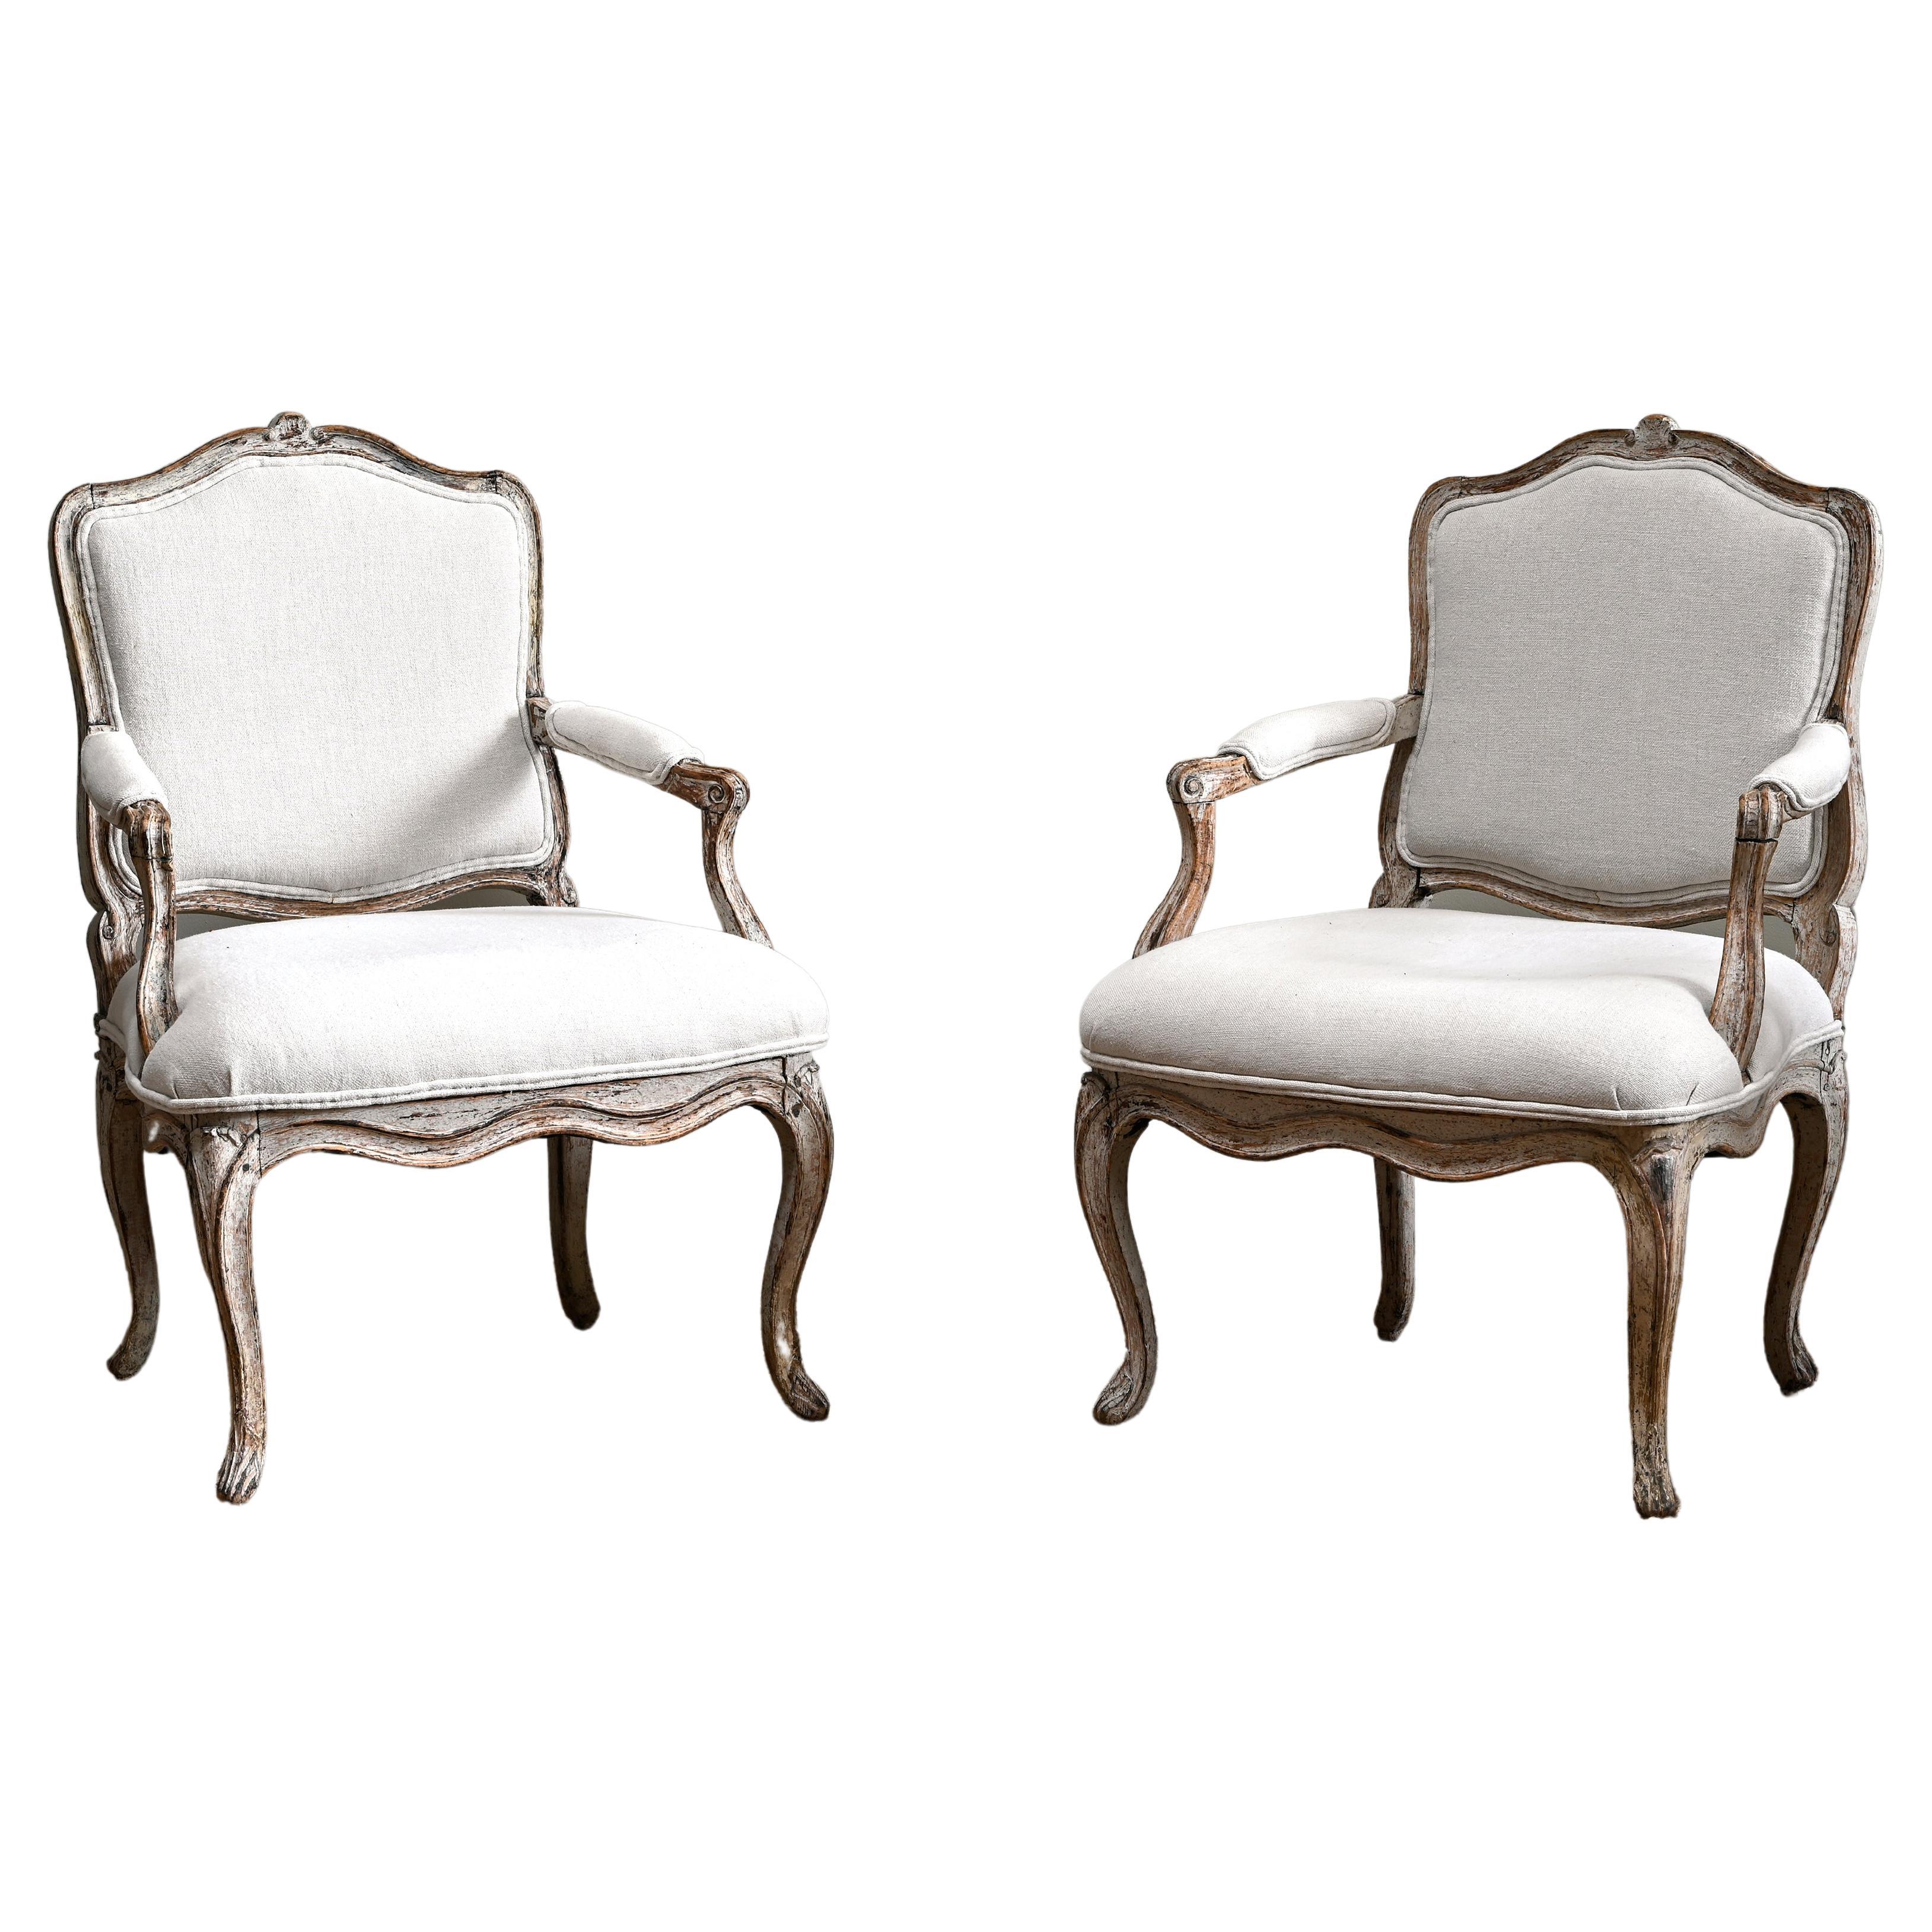 Fine Pair of 18th Century French Rococo Armchairs For Sale